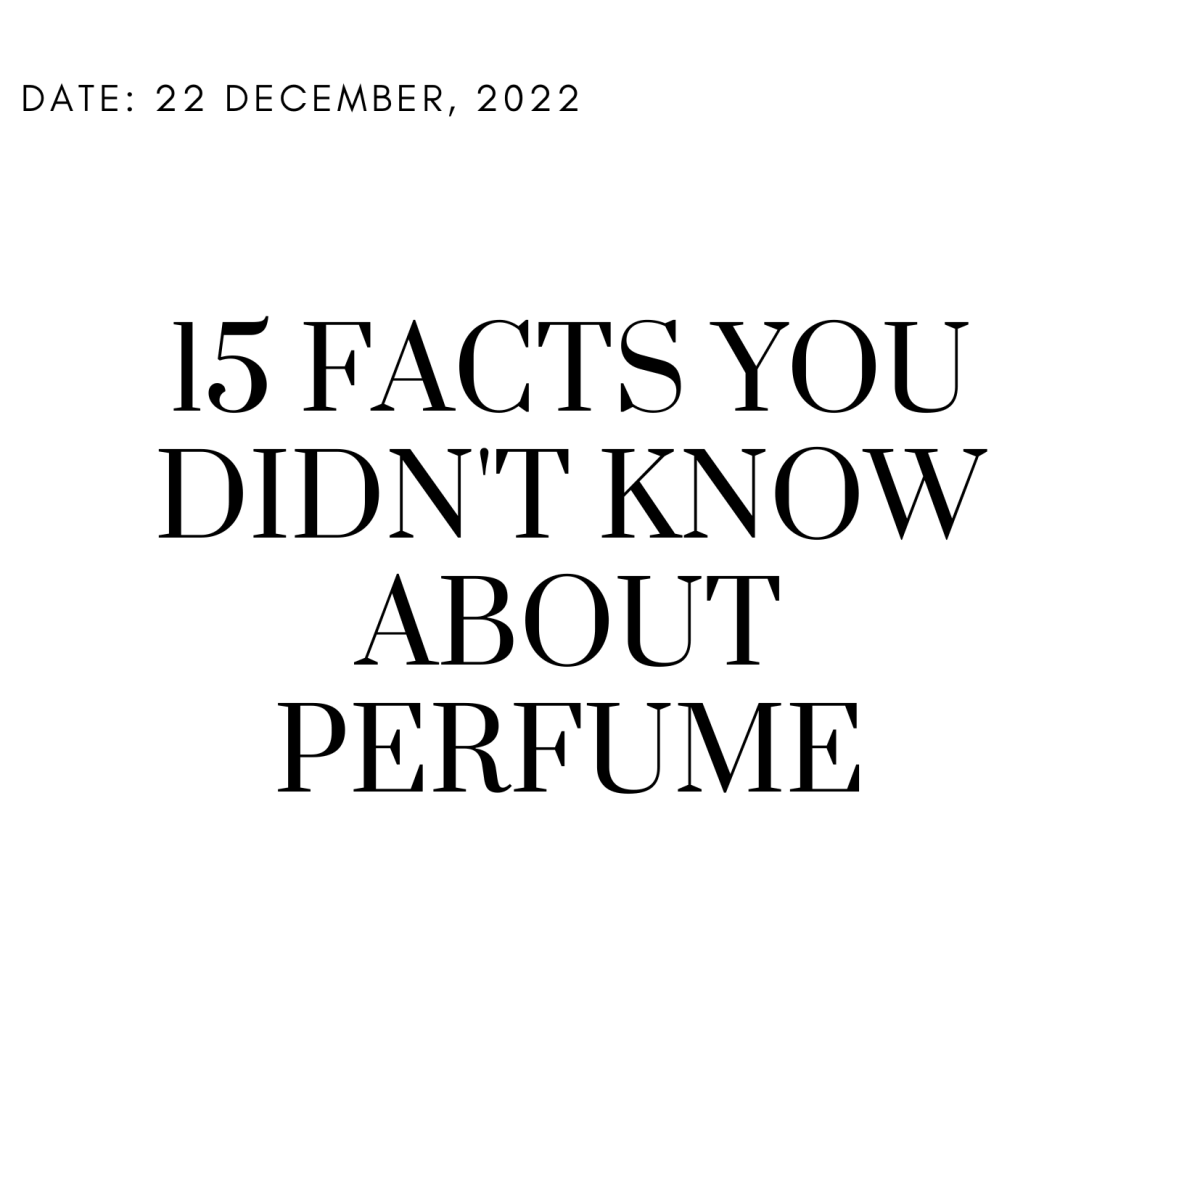 15 Facts You Didn't Know About Perfume